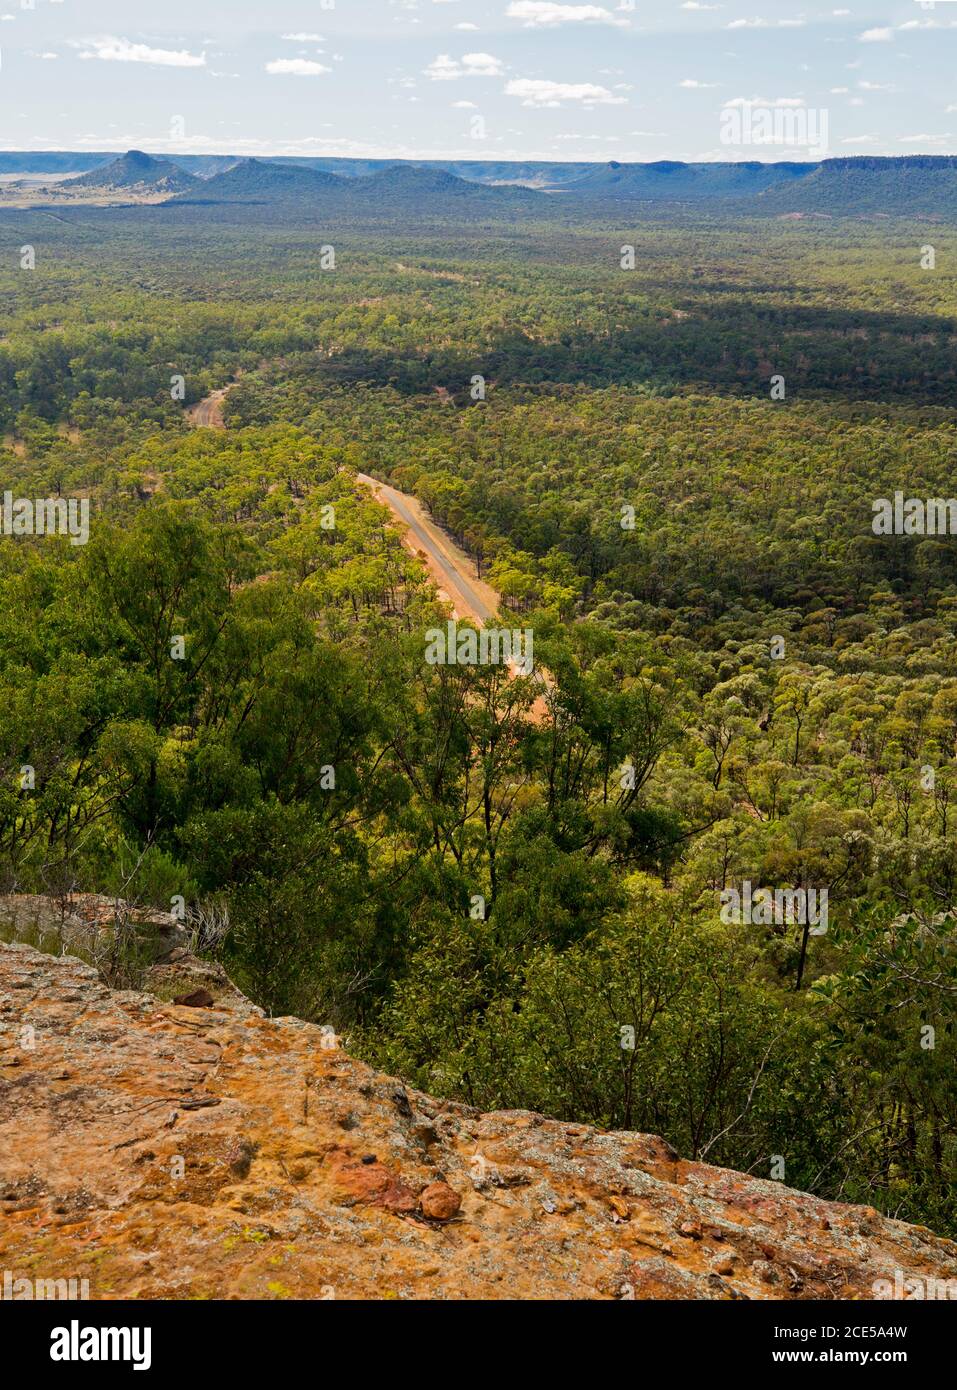 Landscape of hills and vast forests severed by narrow road viewed from high lookout at southern end of Arcadia Valley in central Queensland Australia Stock Photo